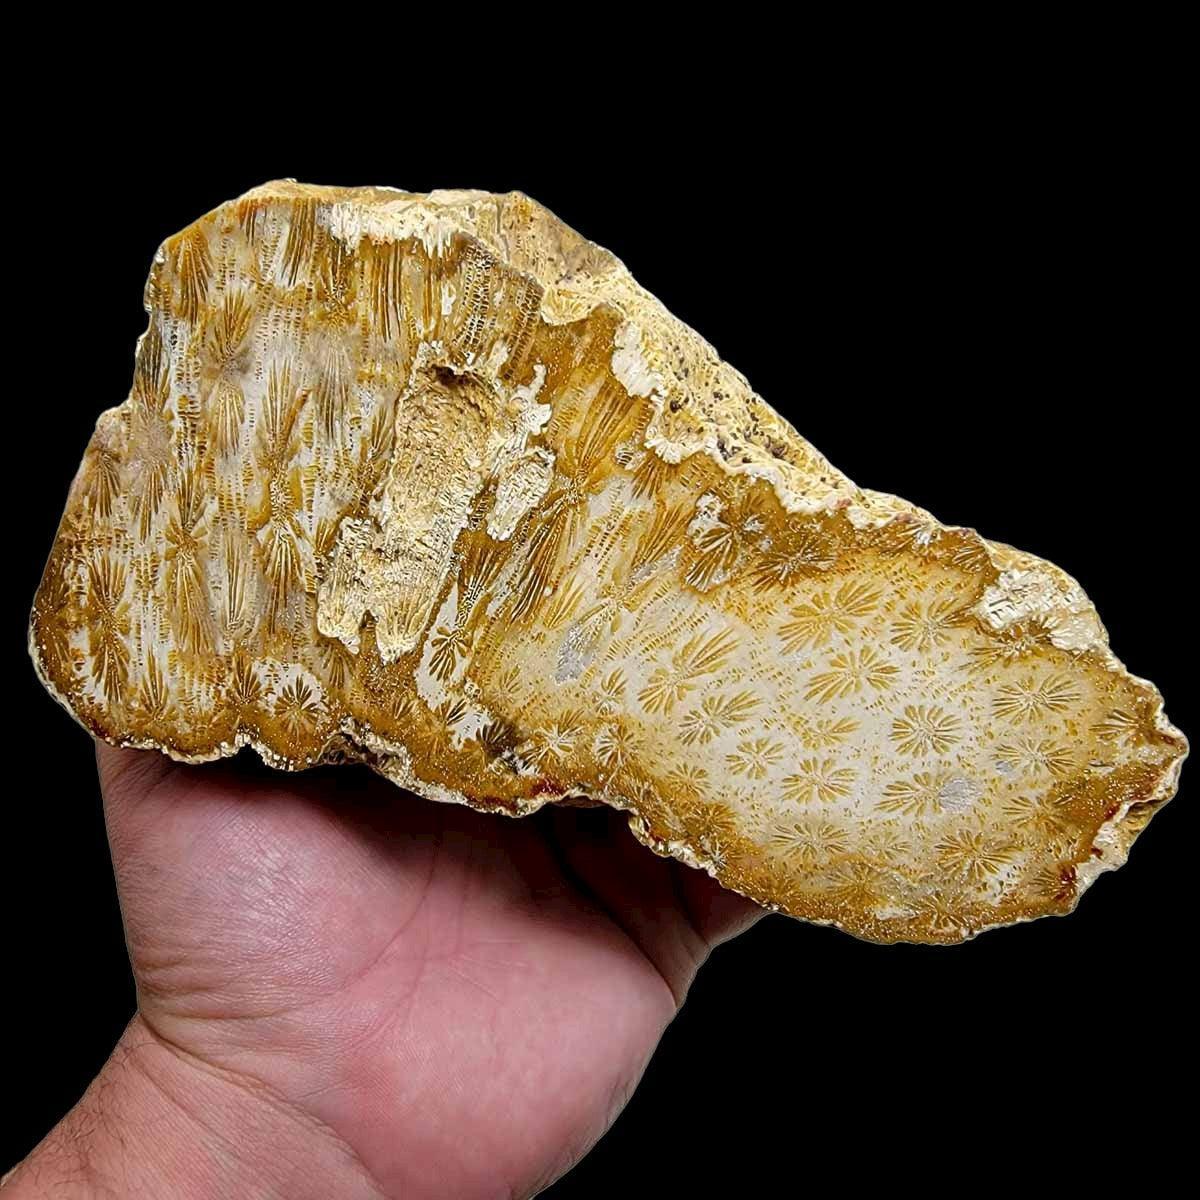 Polished Indonesian Fossil Coral Display Specimen! - LapidaryCentral